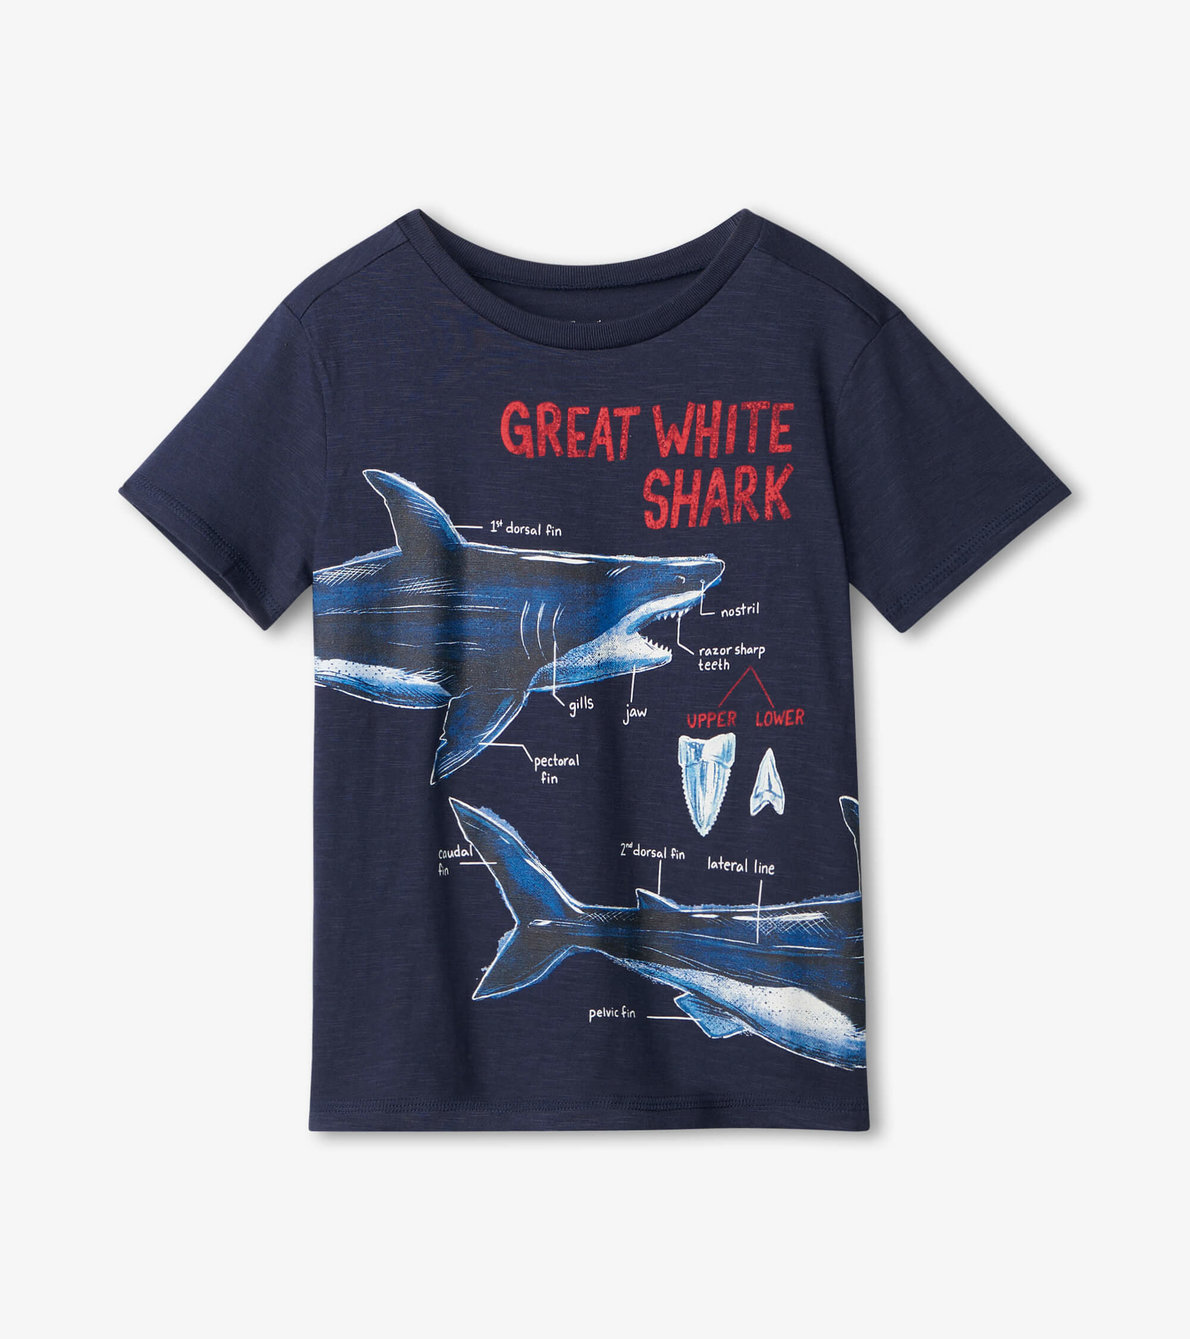 View larger image of Great White Shark Graphic Tee